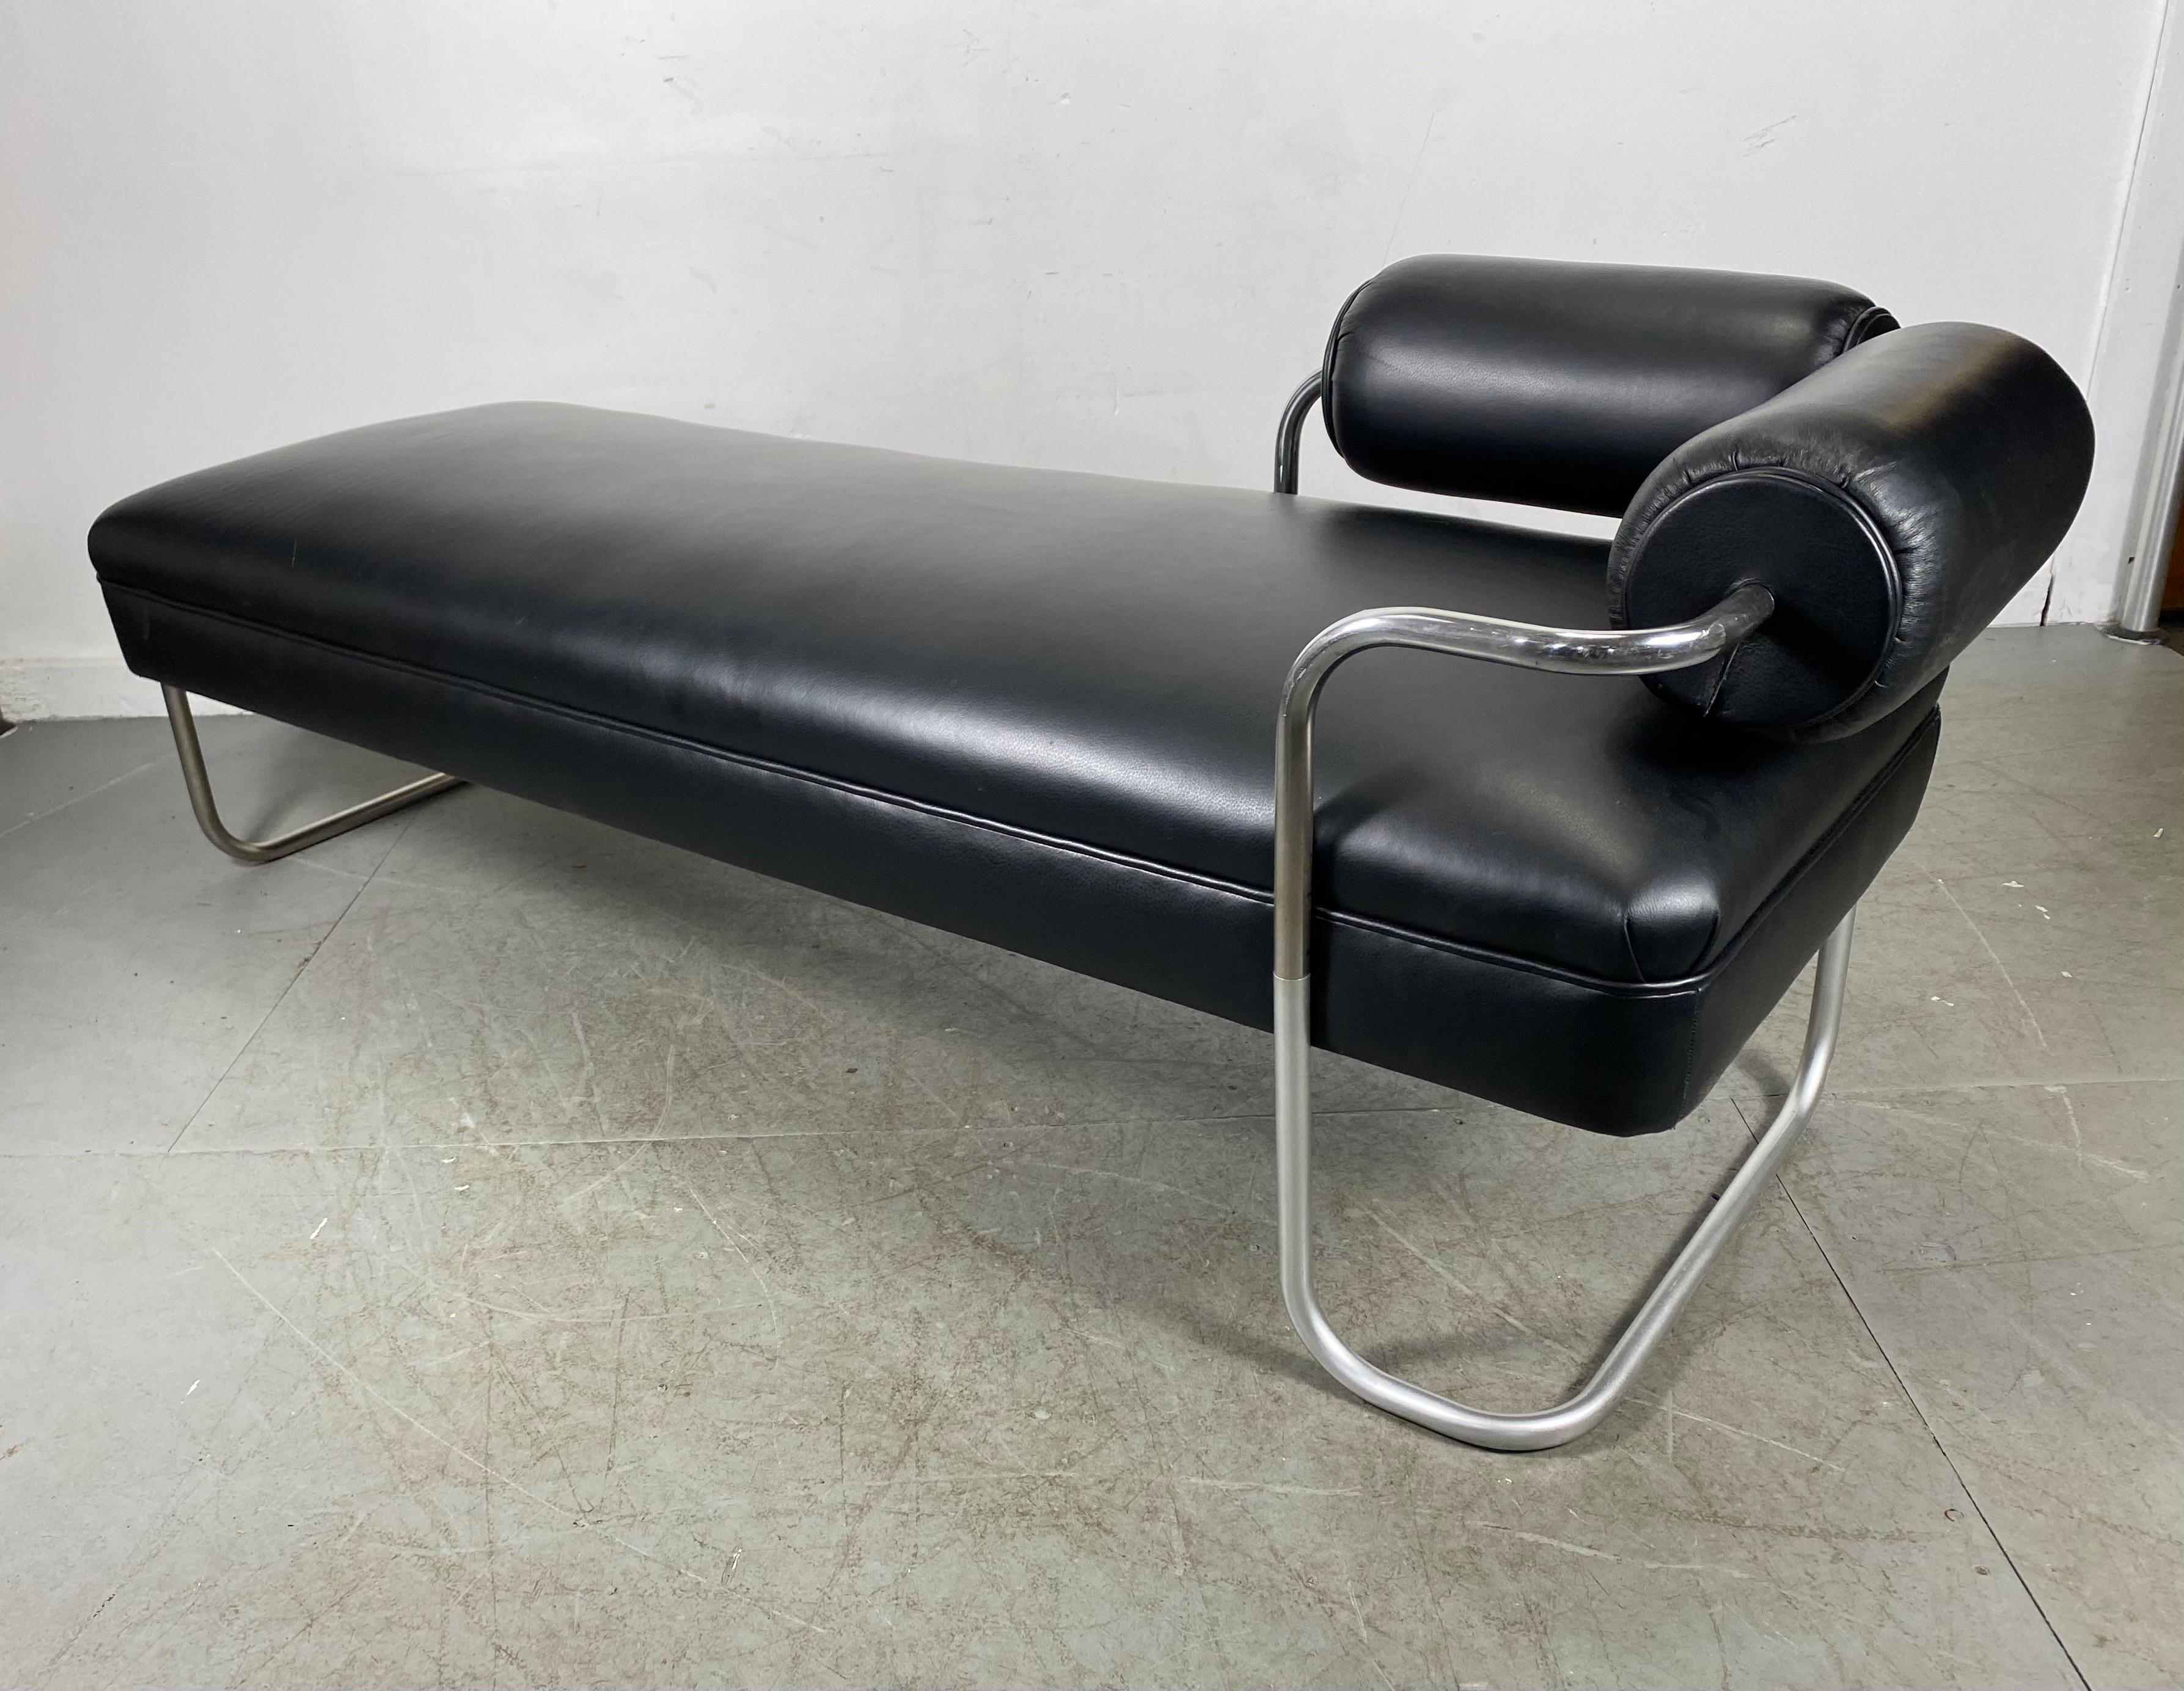 Mid-20th Century Unusual Tubular Chrome and Leather Bauhaus Chaise Lounge / Daybed